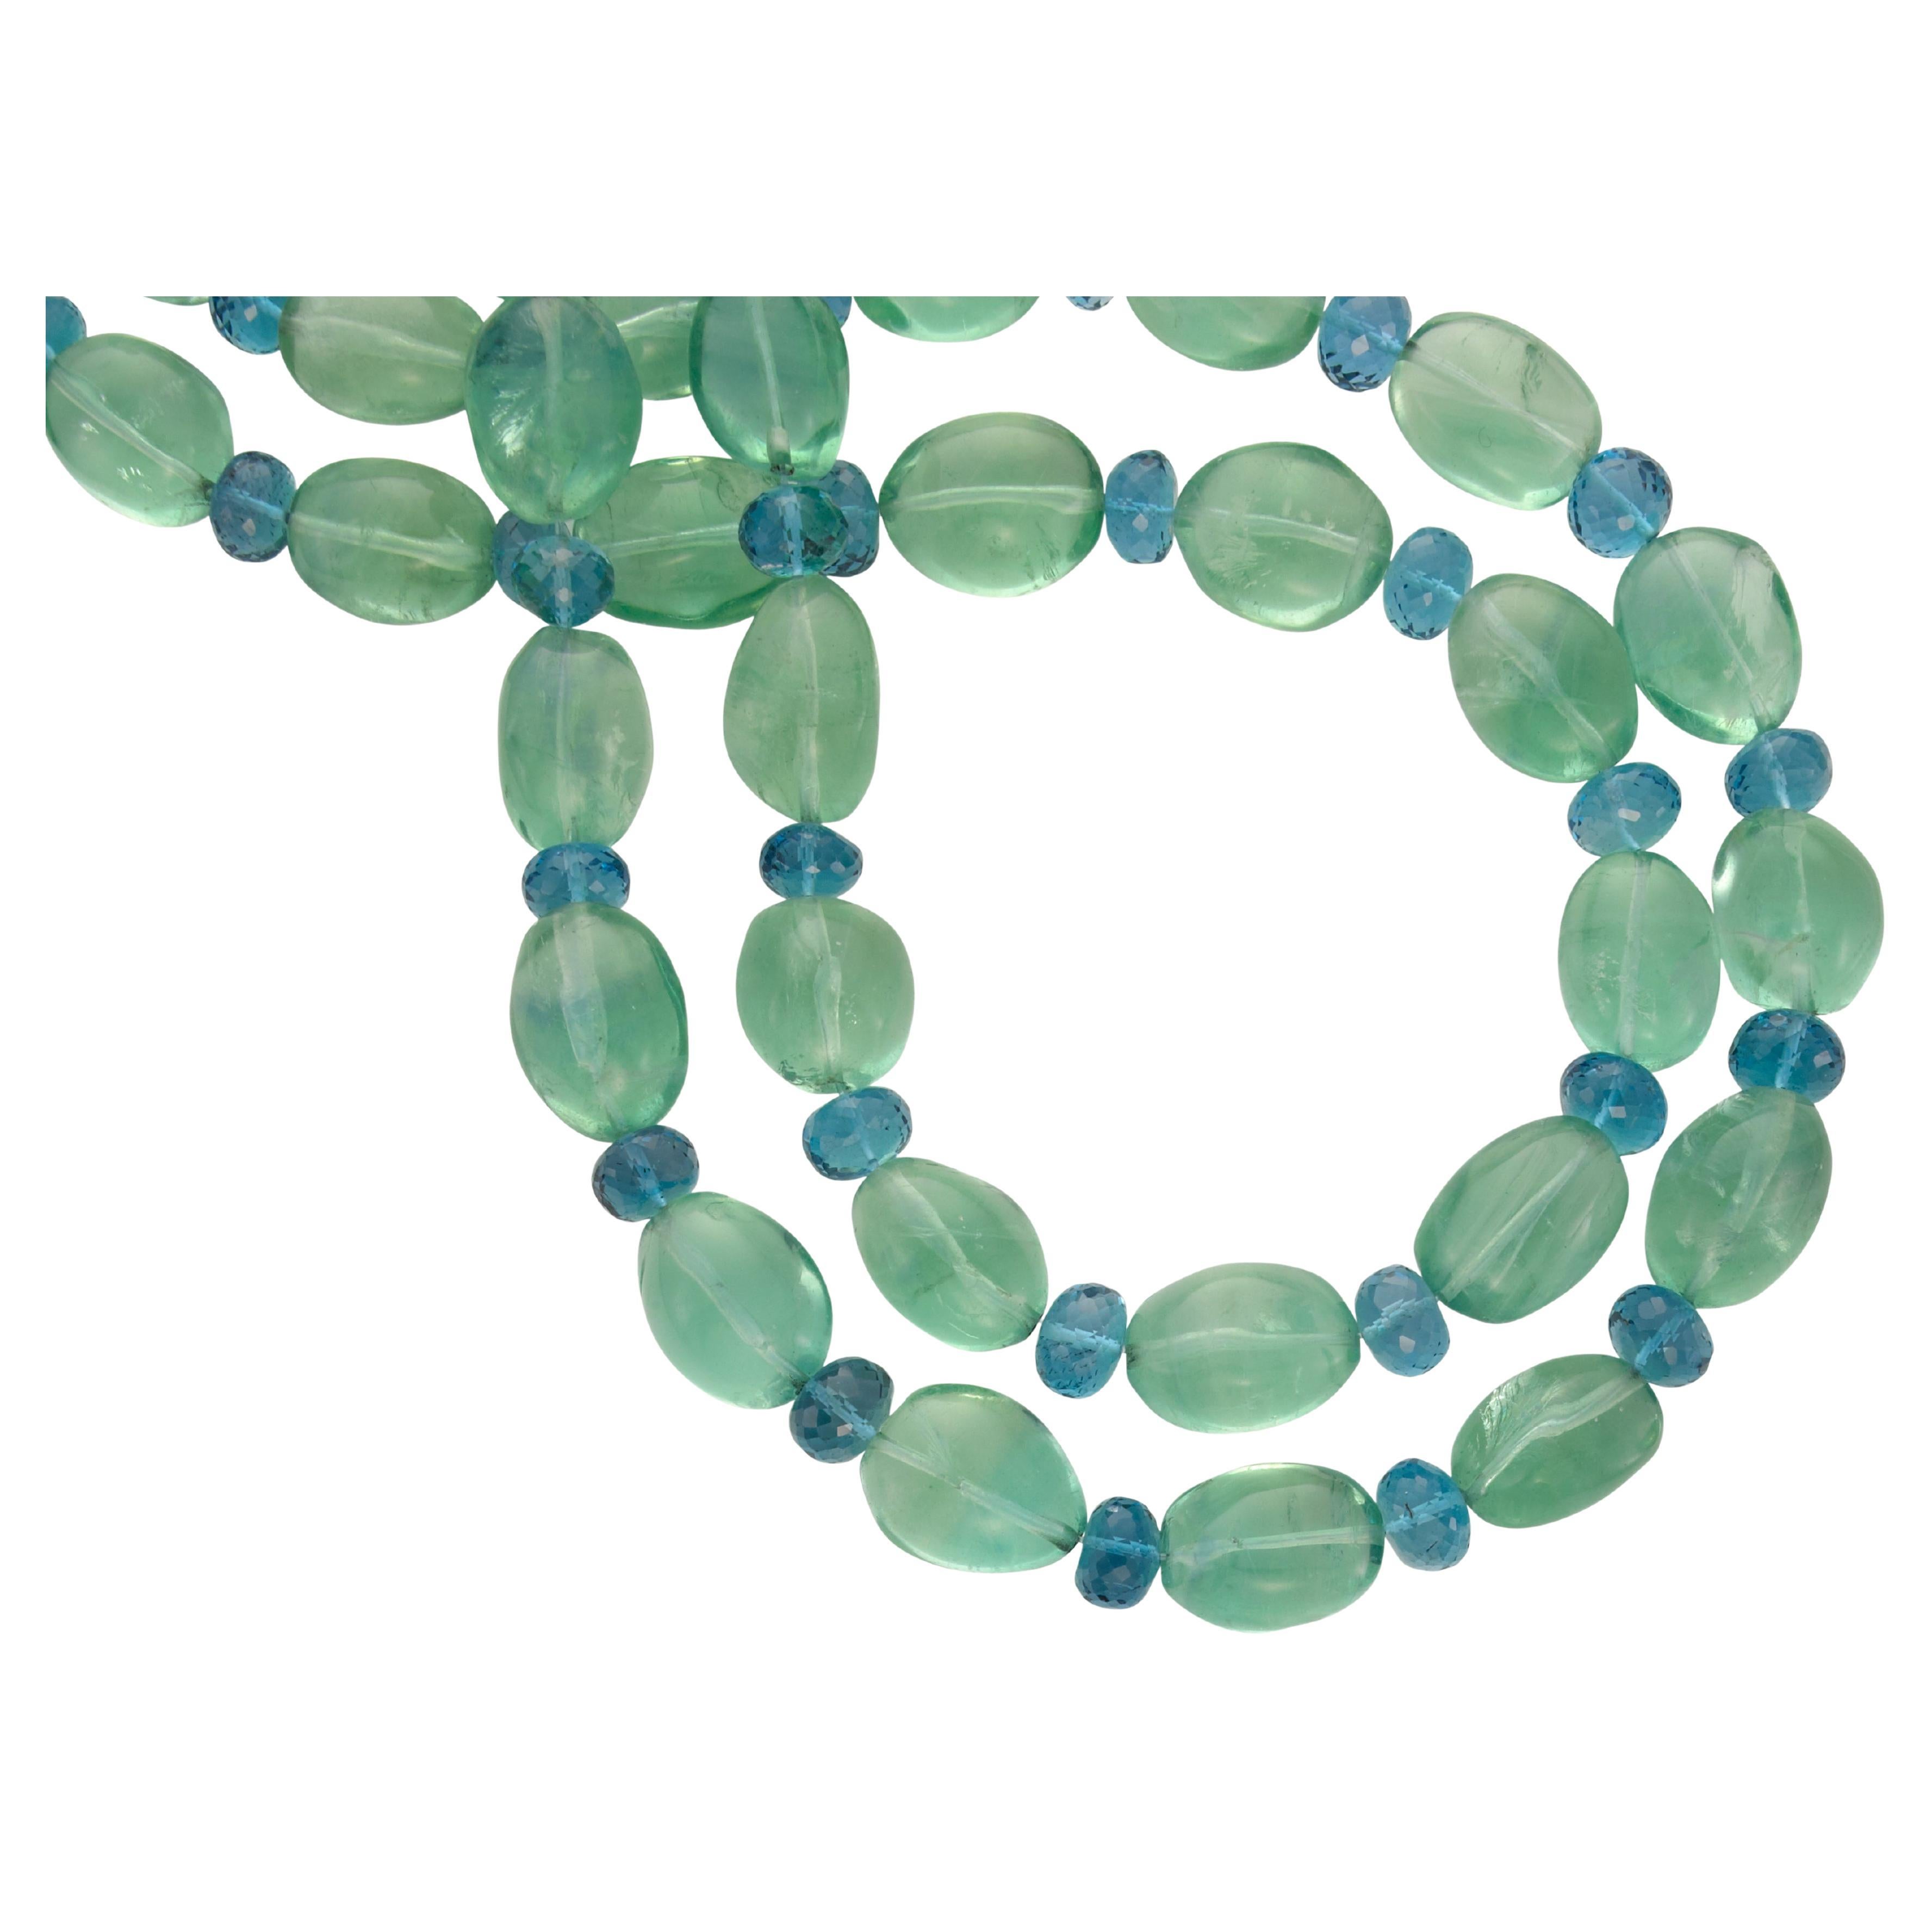 Sorab & Roshi Fluorite Bead Necklace with Faceted Blue Topaz Bead Accent